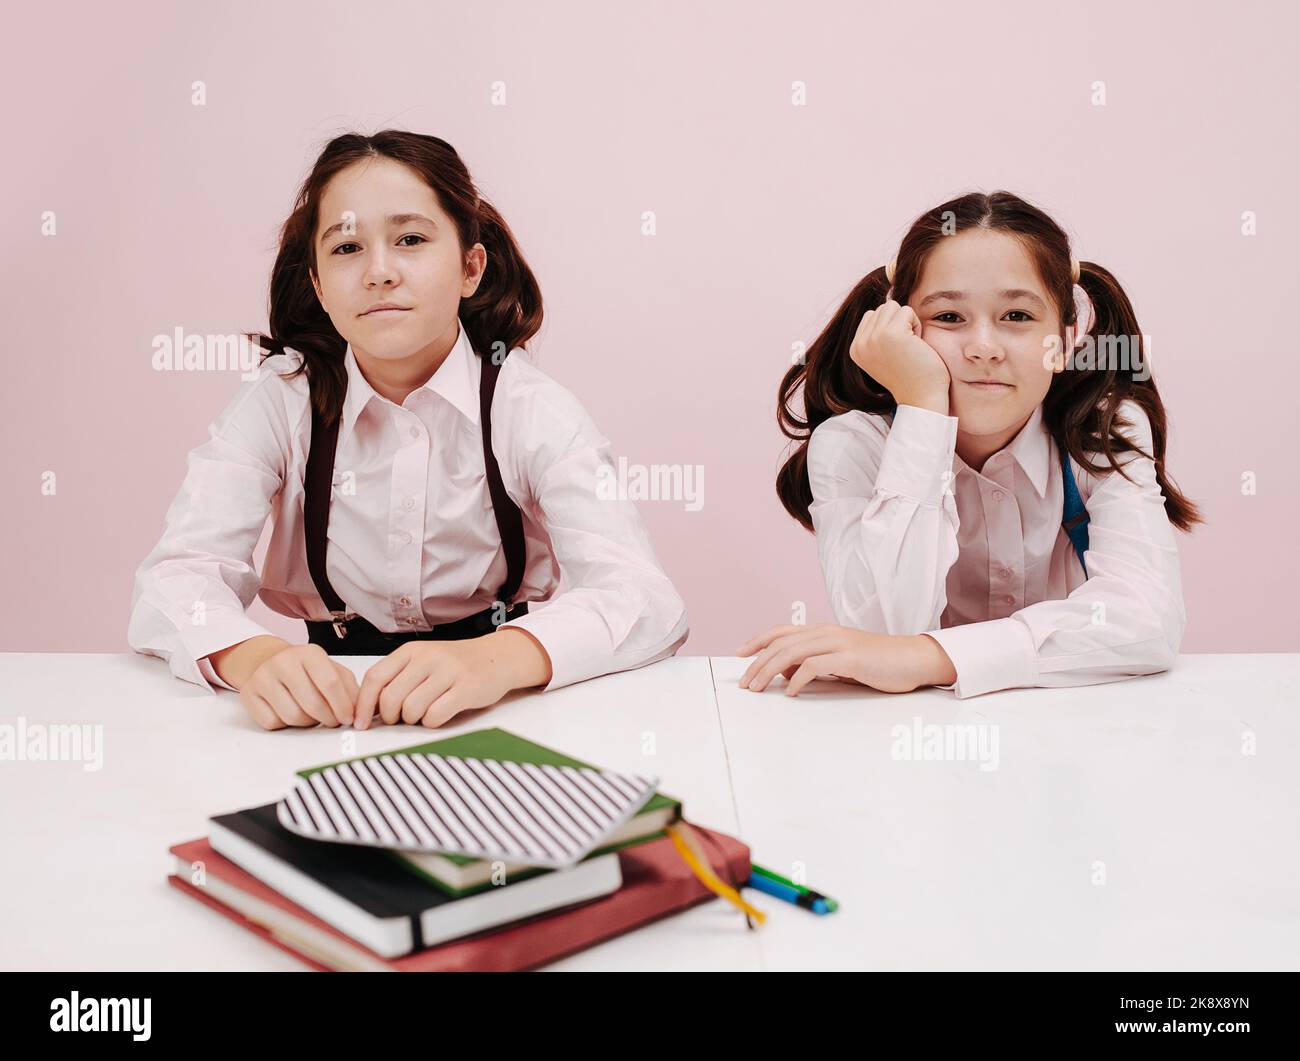 Slightly bored and tired twin schoolgirls sitting behind the desk. They are wearig twintails, shirts and suspenders. over pink background. Stock Photo